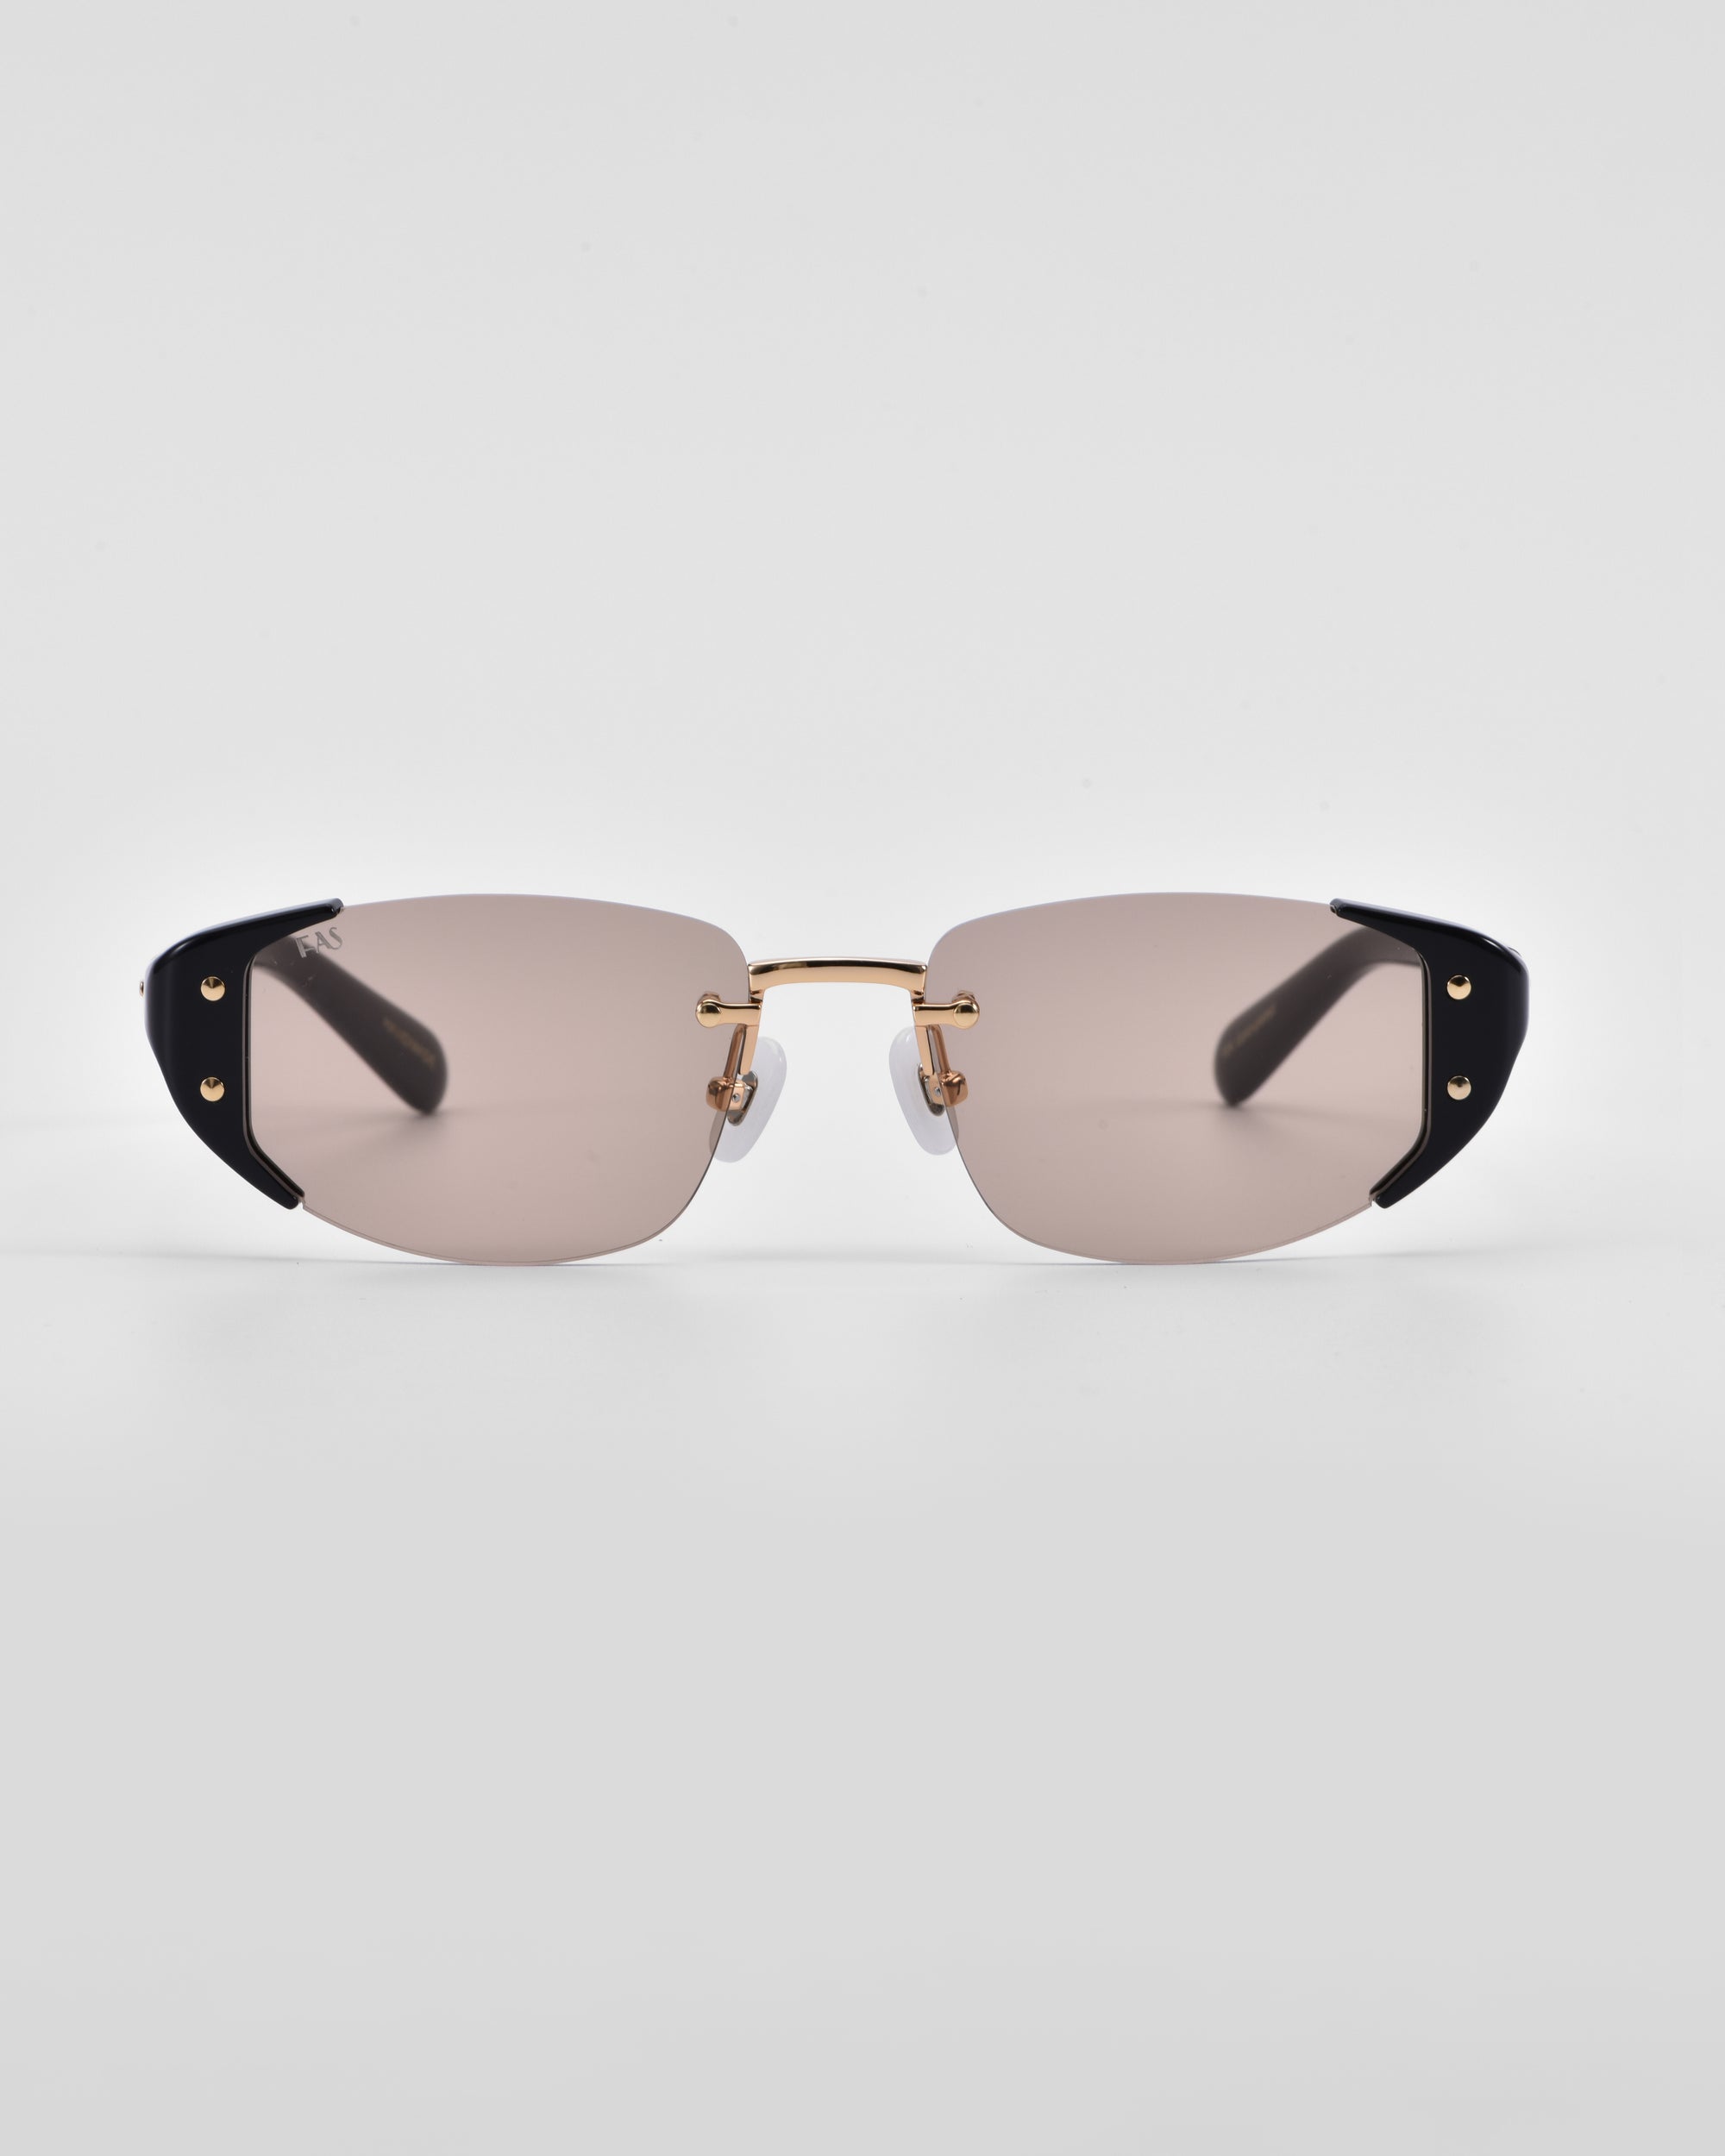 A pair of sleek For Art&#39;s Sake® Harbour sunglasses featuring rectangular, tinted lenses, gold metal frames, and black accents on the corners. The retro-inspired design is complemented by jade-stone nose pads, making them both minimalist and modern against a plain white background.